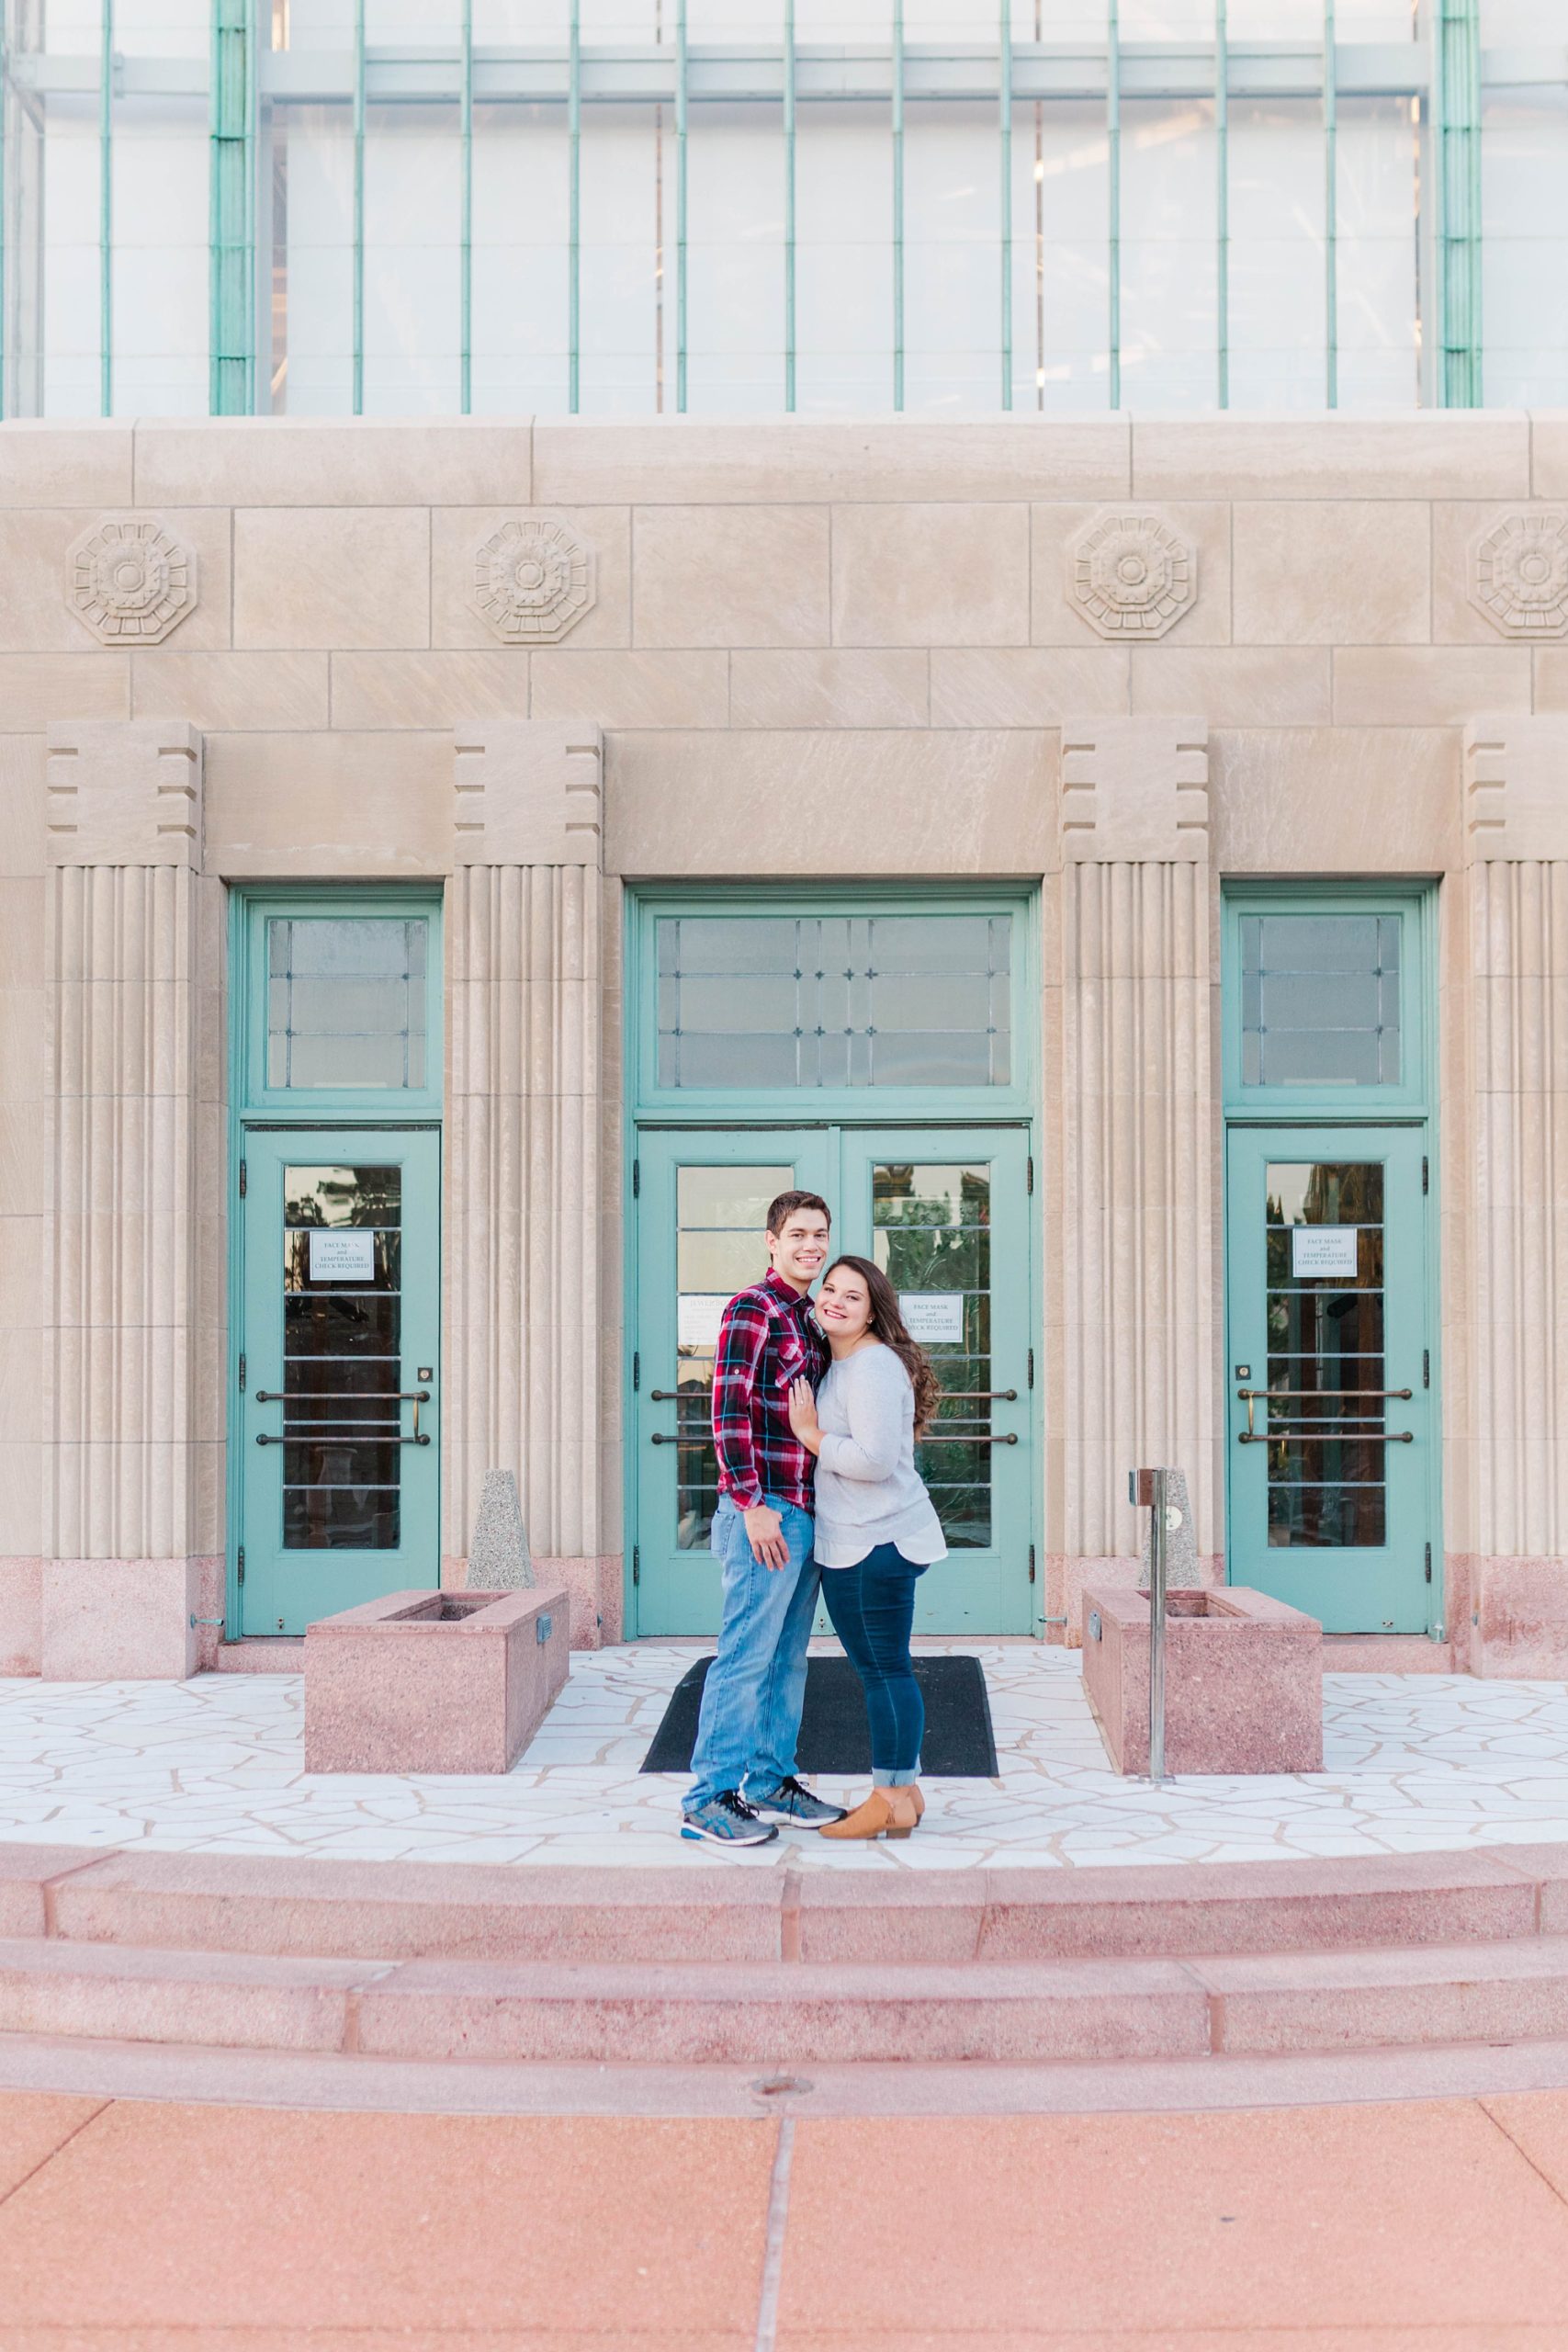 engaged couple poses by teal and concrete building